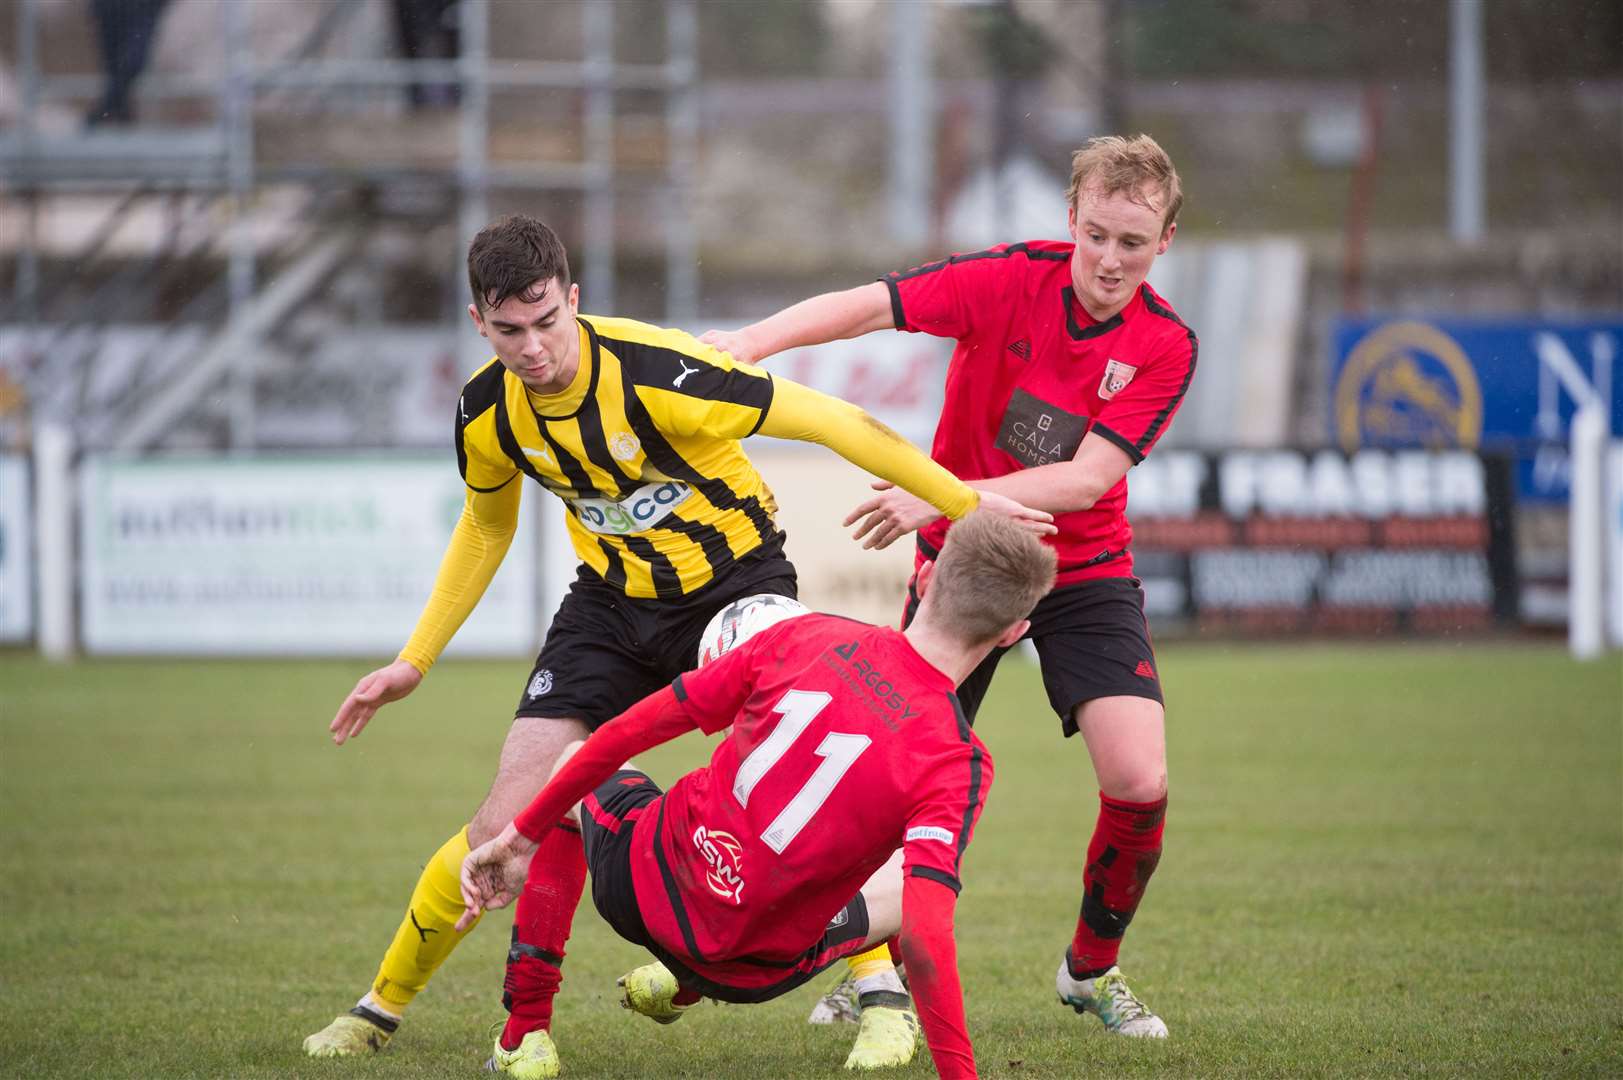 Breedon Highland League - Nairn County v Inverurie Locos, Station Park, Nairn...Nairn's Tom MacLennan fights hard to keep possession from Locos Jamie Michie and Andrew Watt (11)...Picture: Callum Mackay. Image No. 043182.